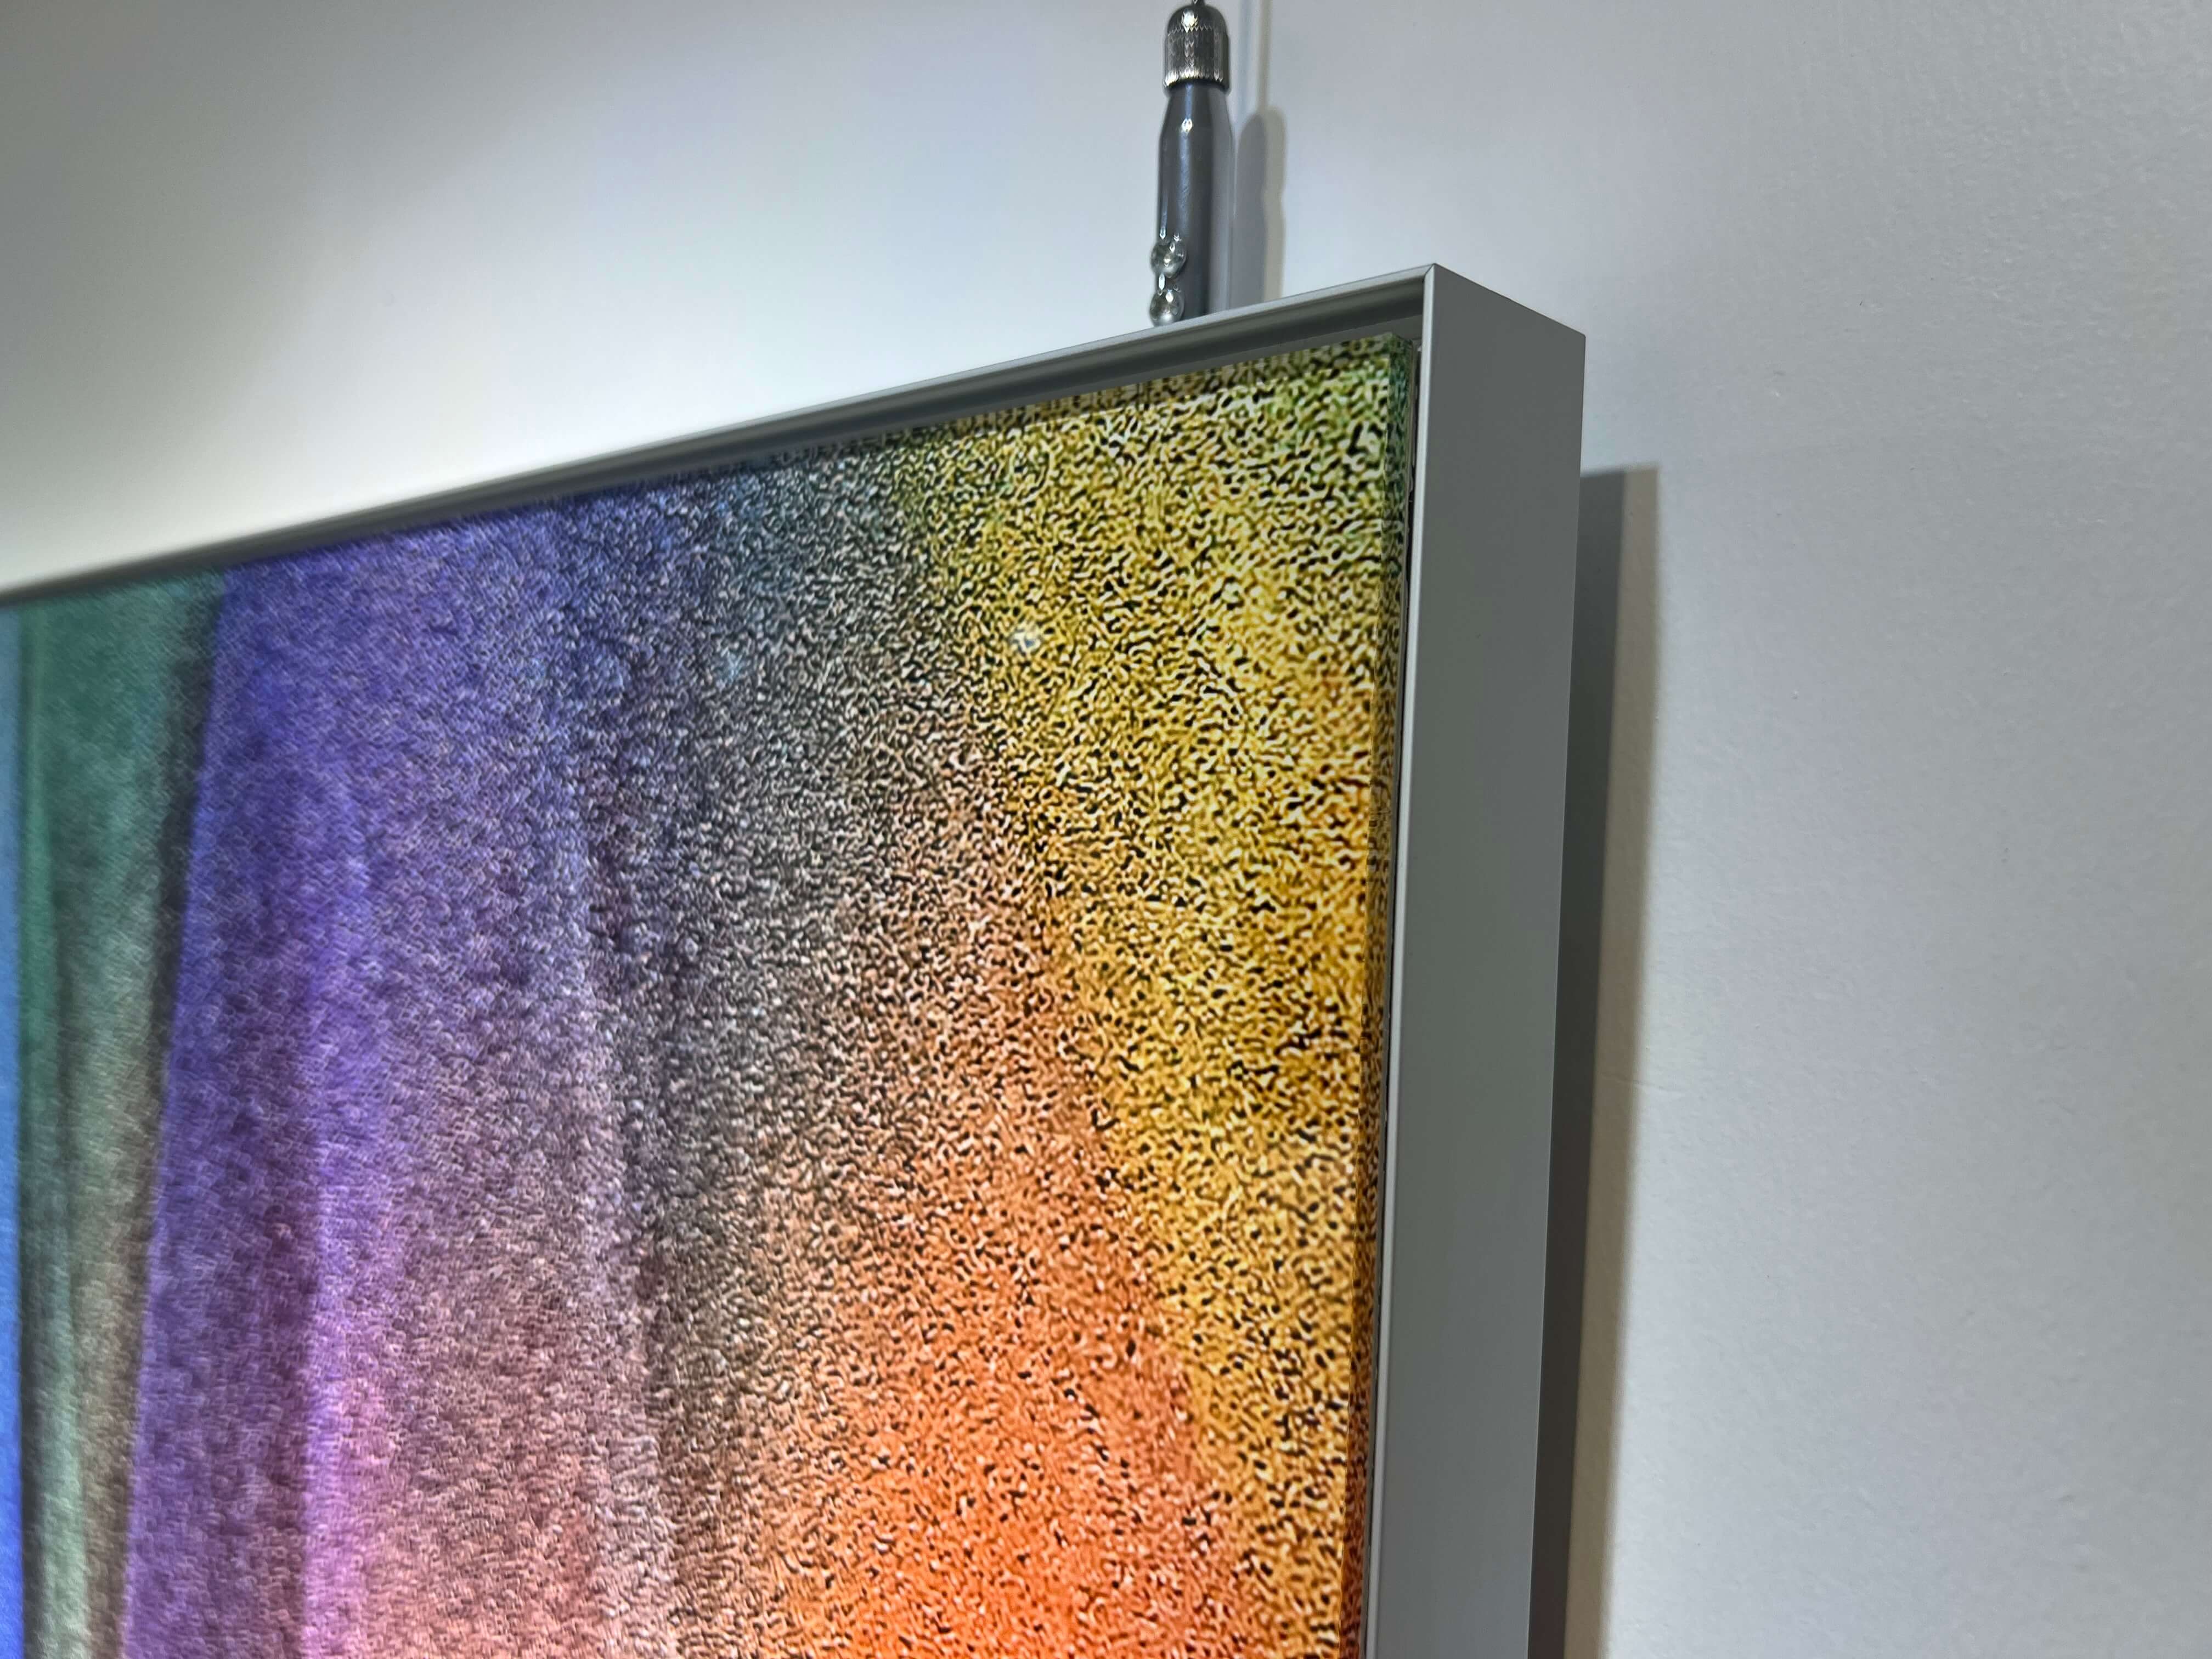 This photo shows a corner of a framed artwork of 'Emotional Spectrum'. You can see the edge where the colours meet the simple, silver frame.  The artwork is hung on a white wall, and there's a small shadow behind the frame. It's like a little piece of a rainbow caught inside a frame on the wall.